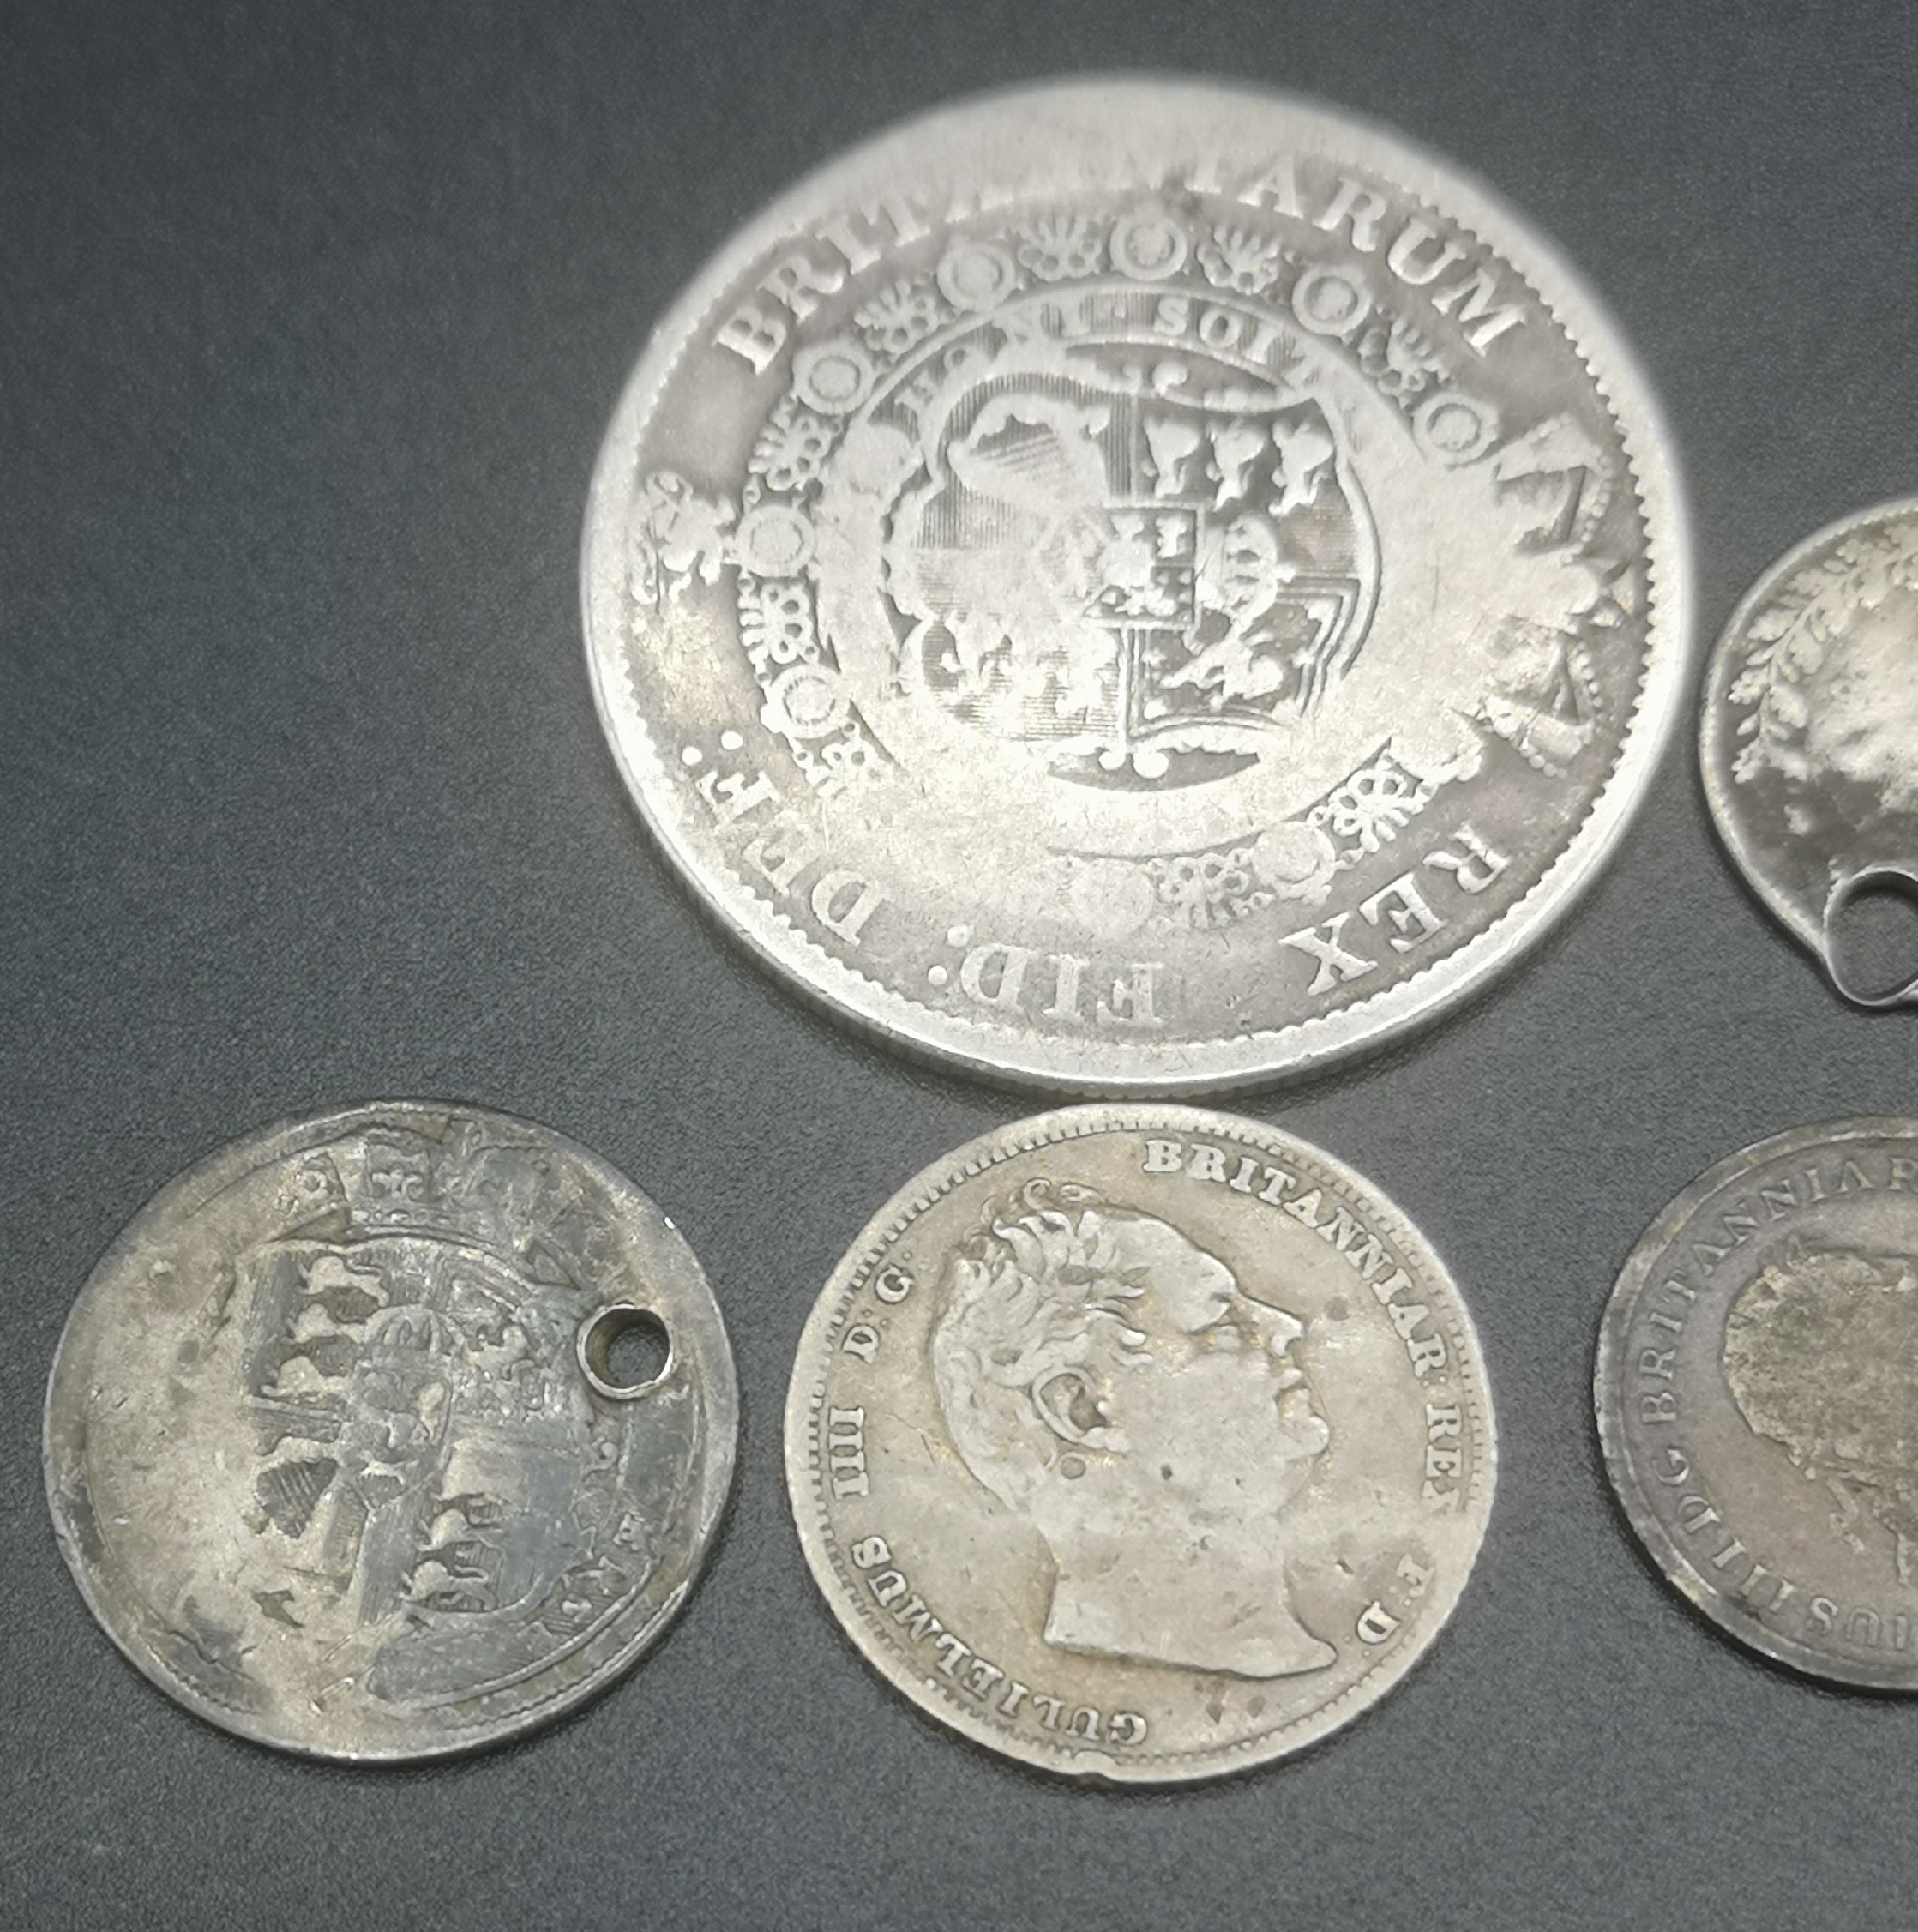 Three King George III coins and two King George IV - Image 5 of 7